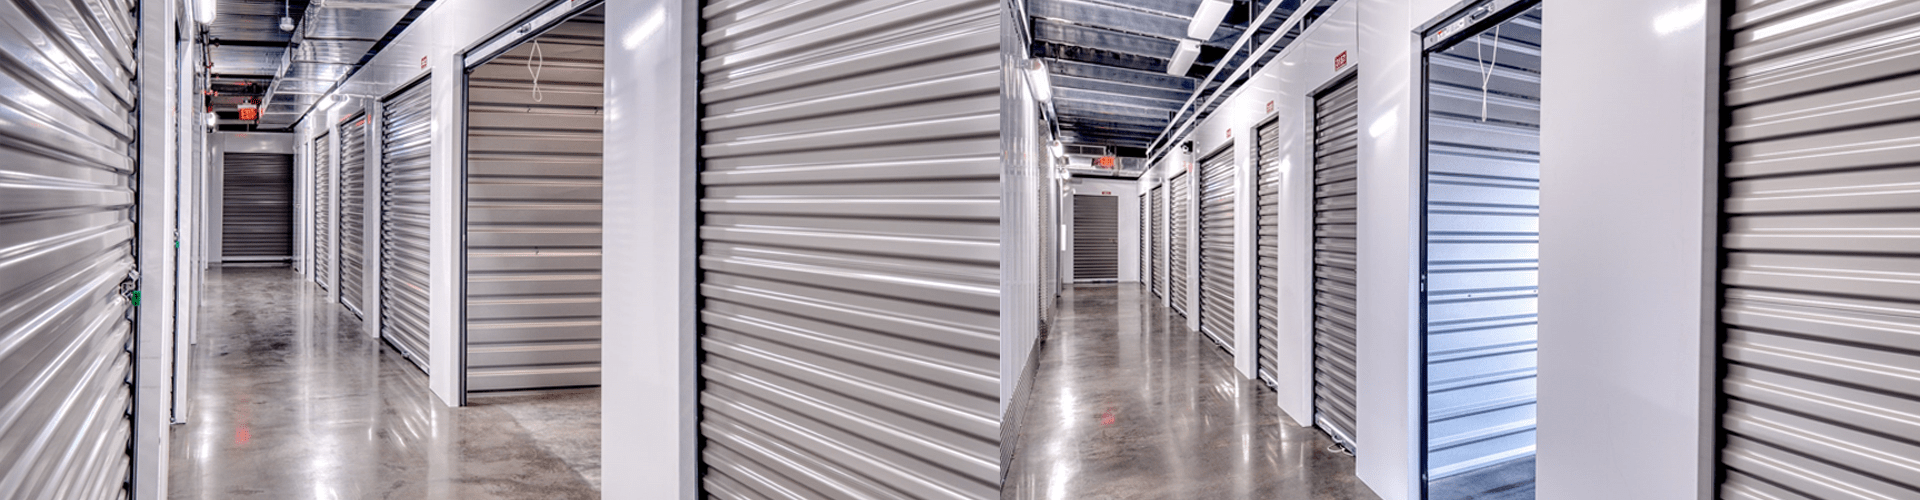 Storage Units in Cranberry Township PA